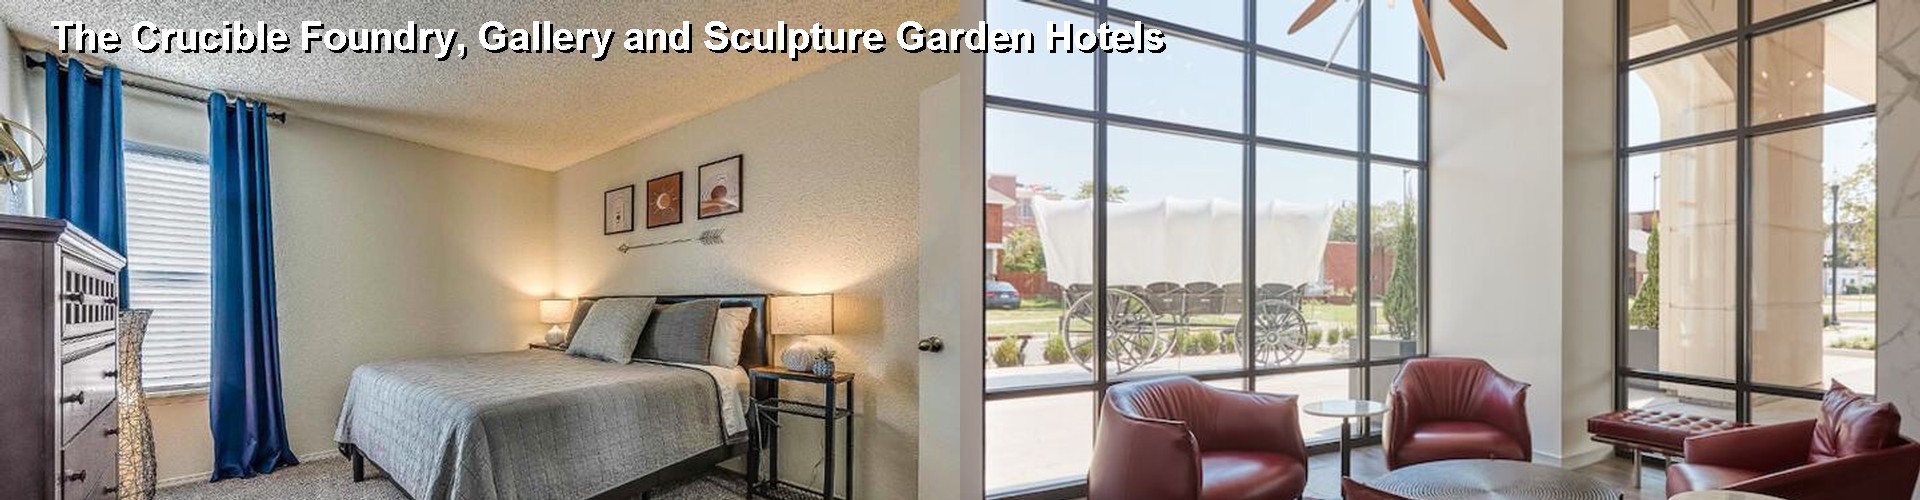 5 Best Hotels near The Crucible Foundry, Gallery and Sculpture Garden